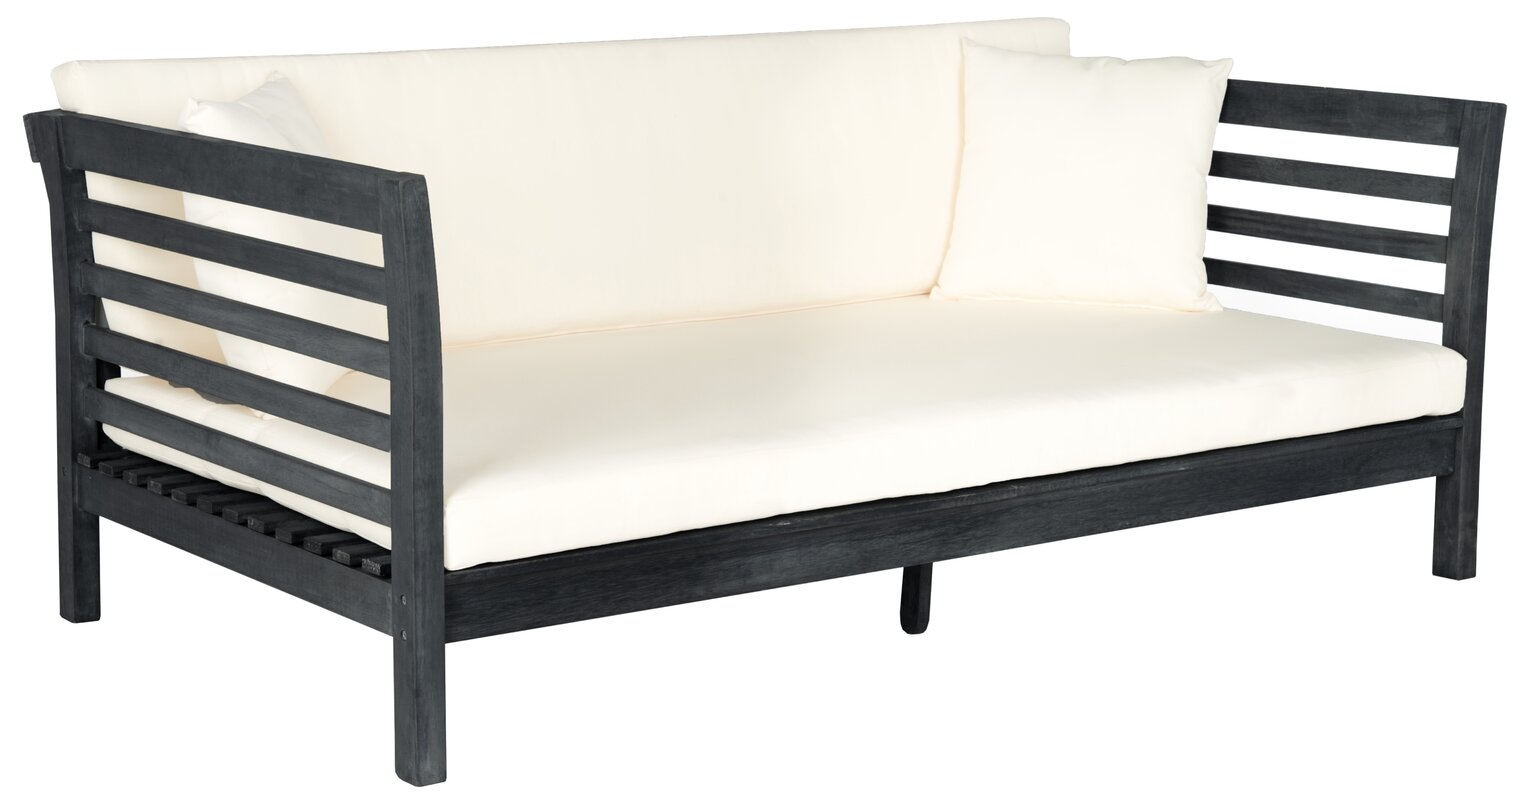 Bodine 72.83" Wide Patio Daybed with Cushions - Image 0